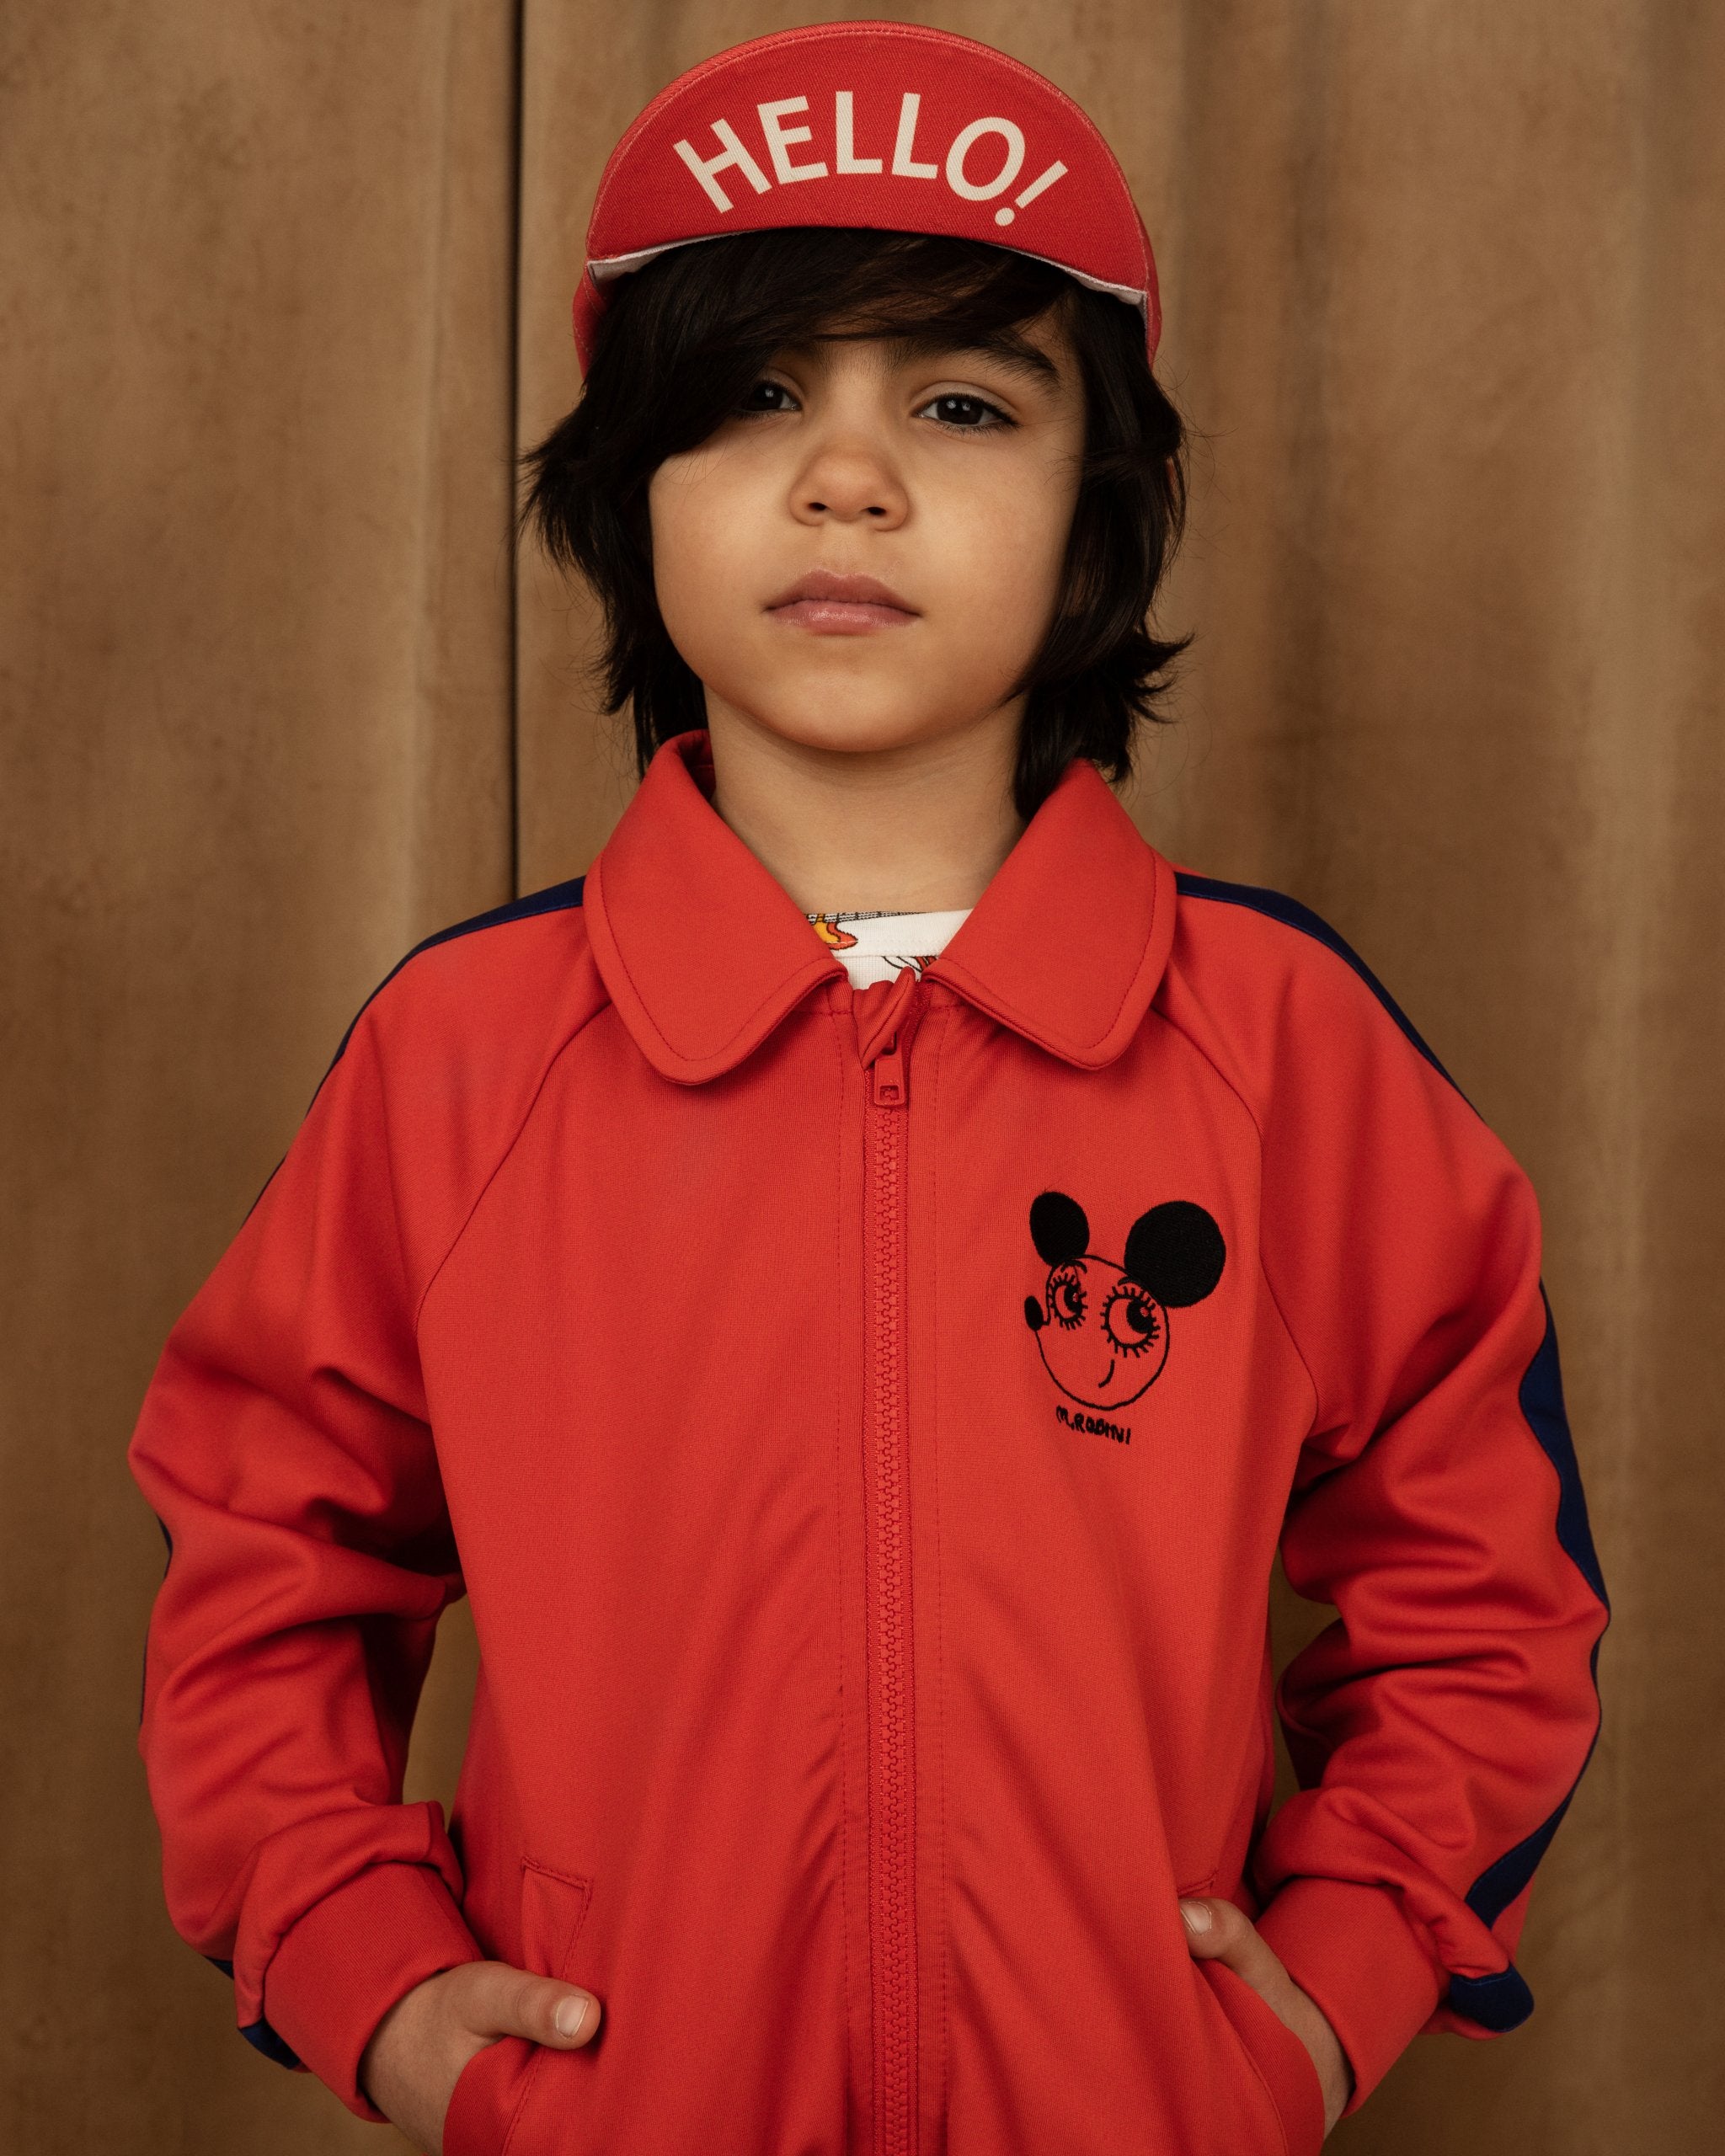 Collared track jacket with stripe detailing in red with mouse logo with child wearing a hat with hello word 